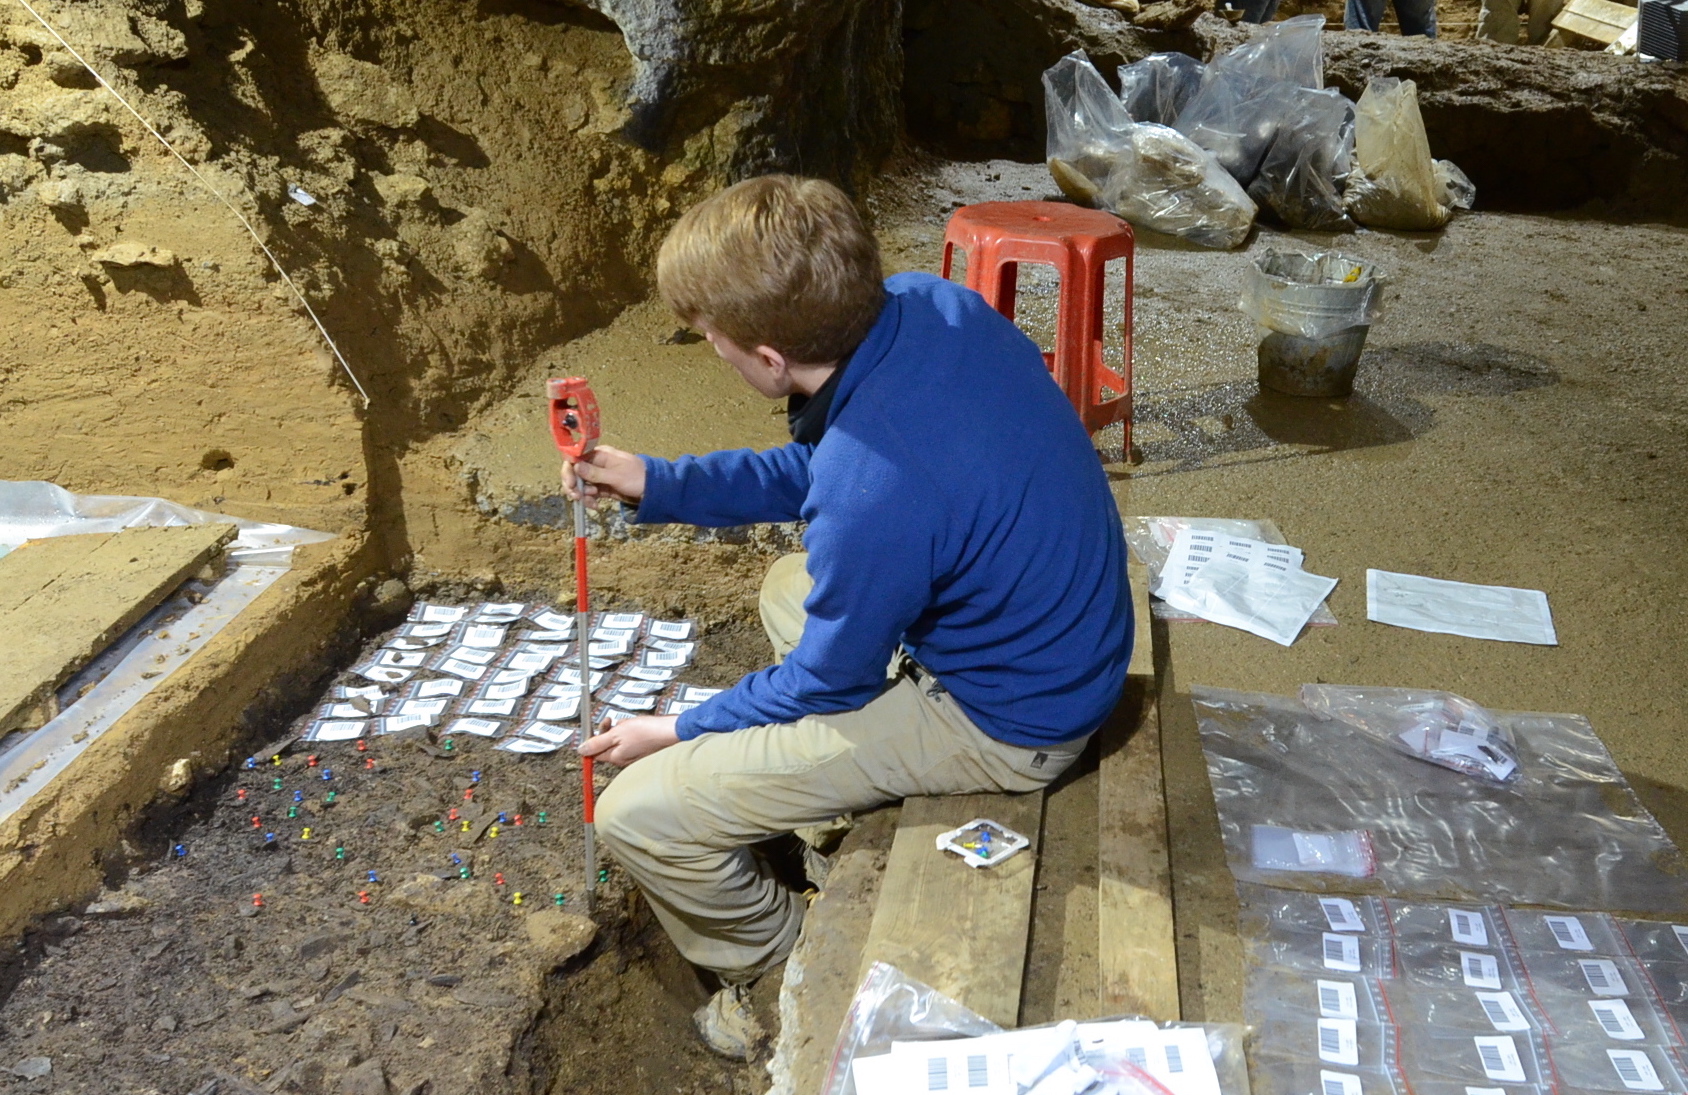 A person using a tool during an archaeological dig in a cave. In front, on dirt, sit about 30 samples placed on top of small white sheets of paper. Behind are plastic bags to hold the findings.